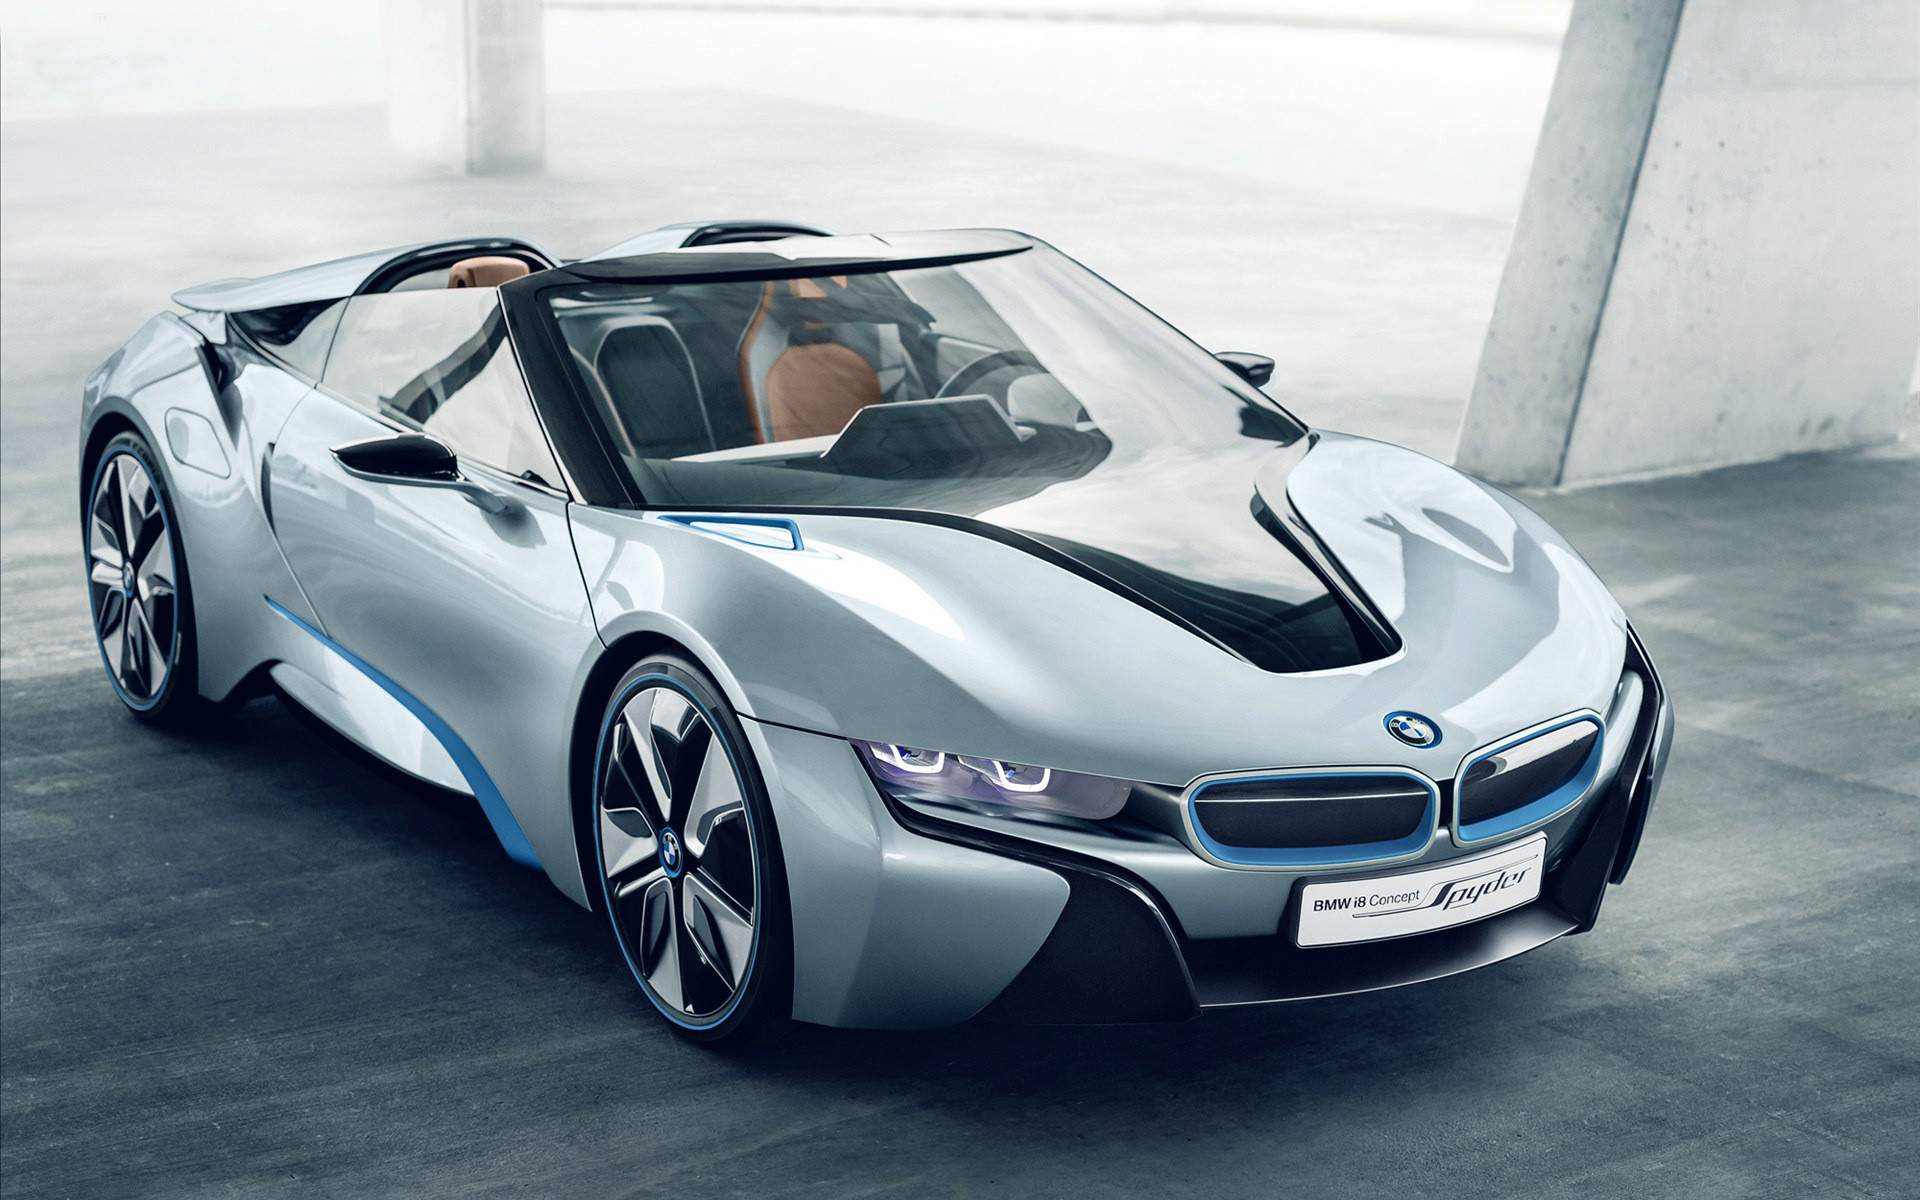 How To BMW i8 the HD Wallpaper Guide  autoevolution